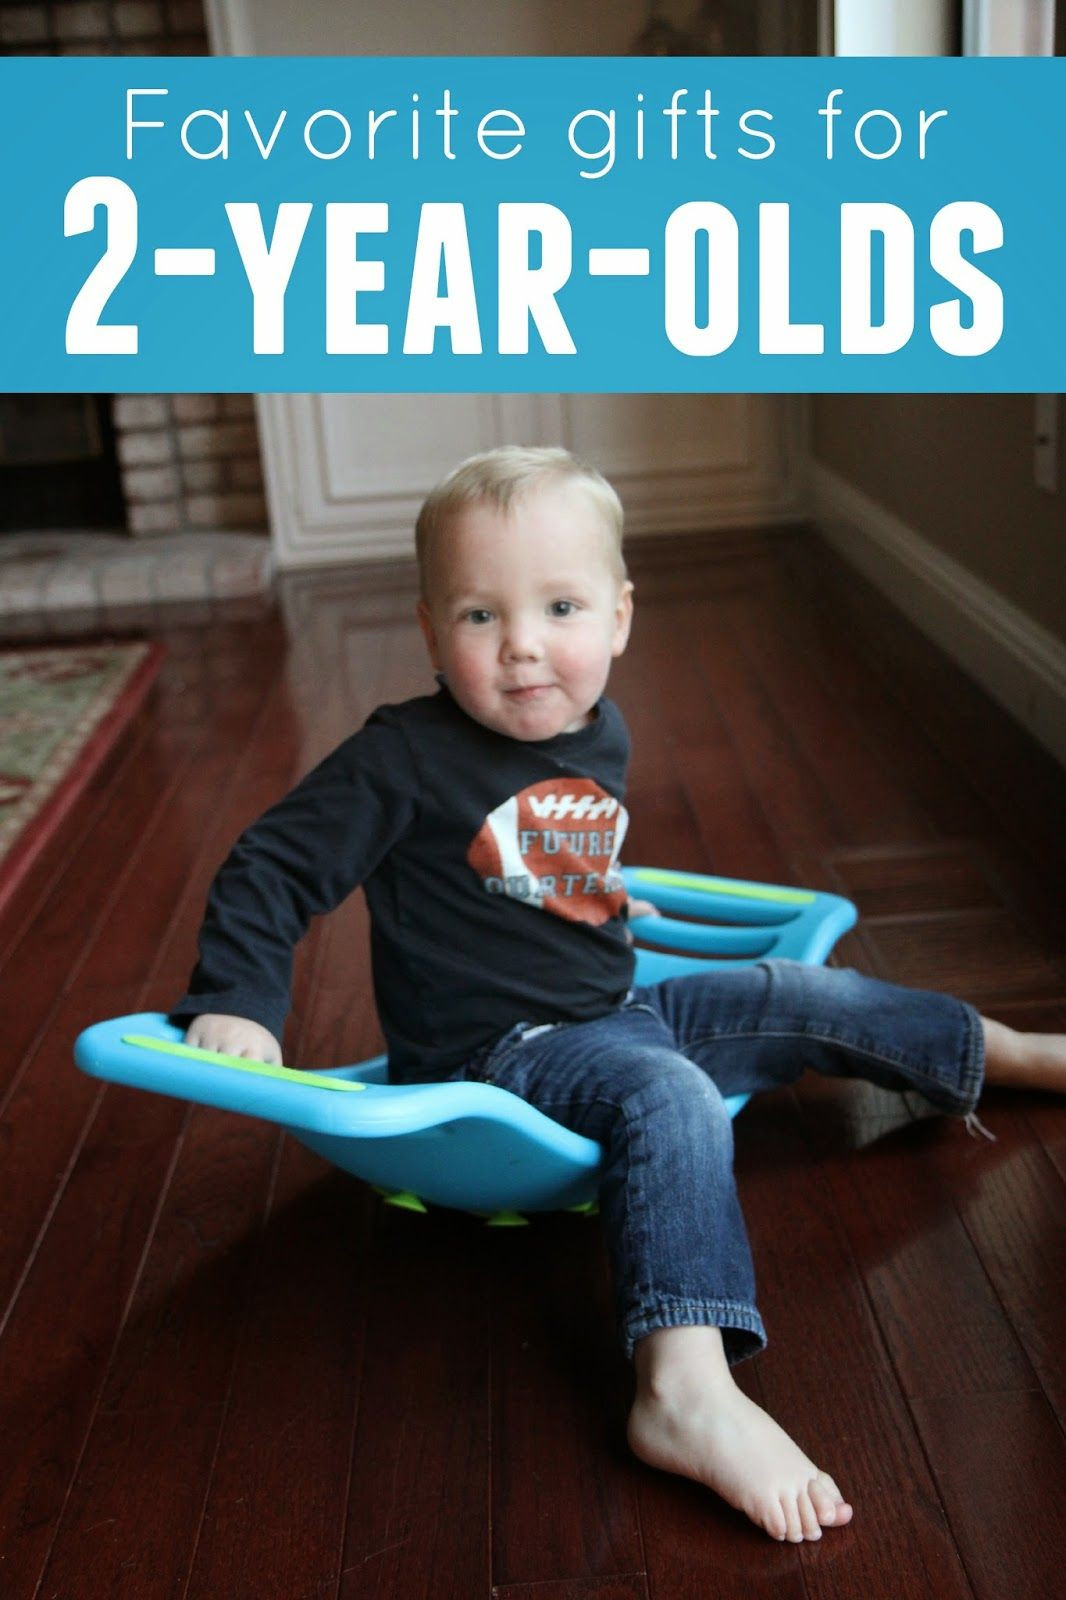 Toddler Gift Ideas For Boys
 Favorite Gifts for 2 Year Olds